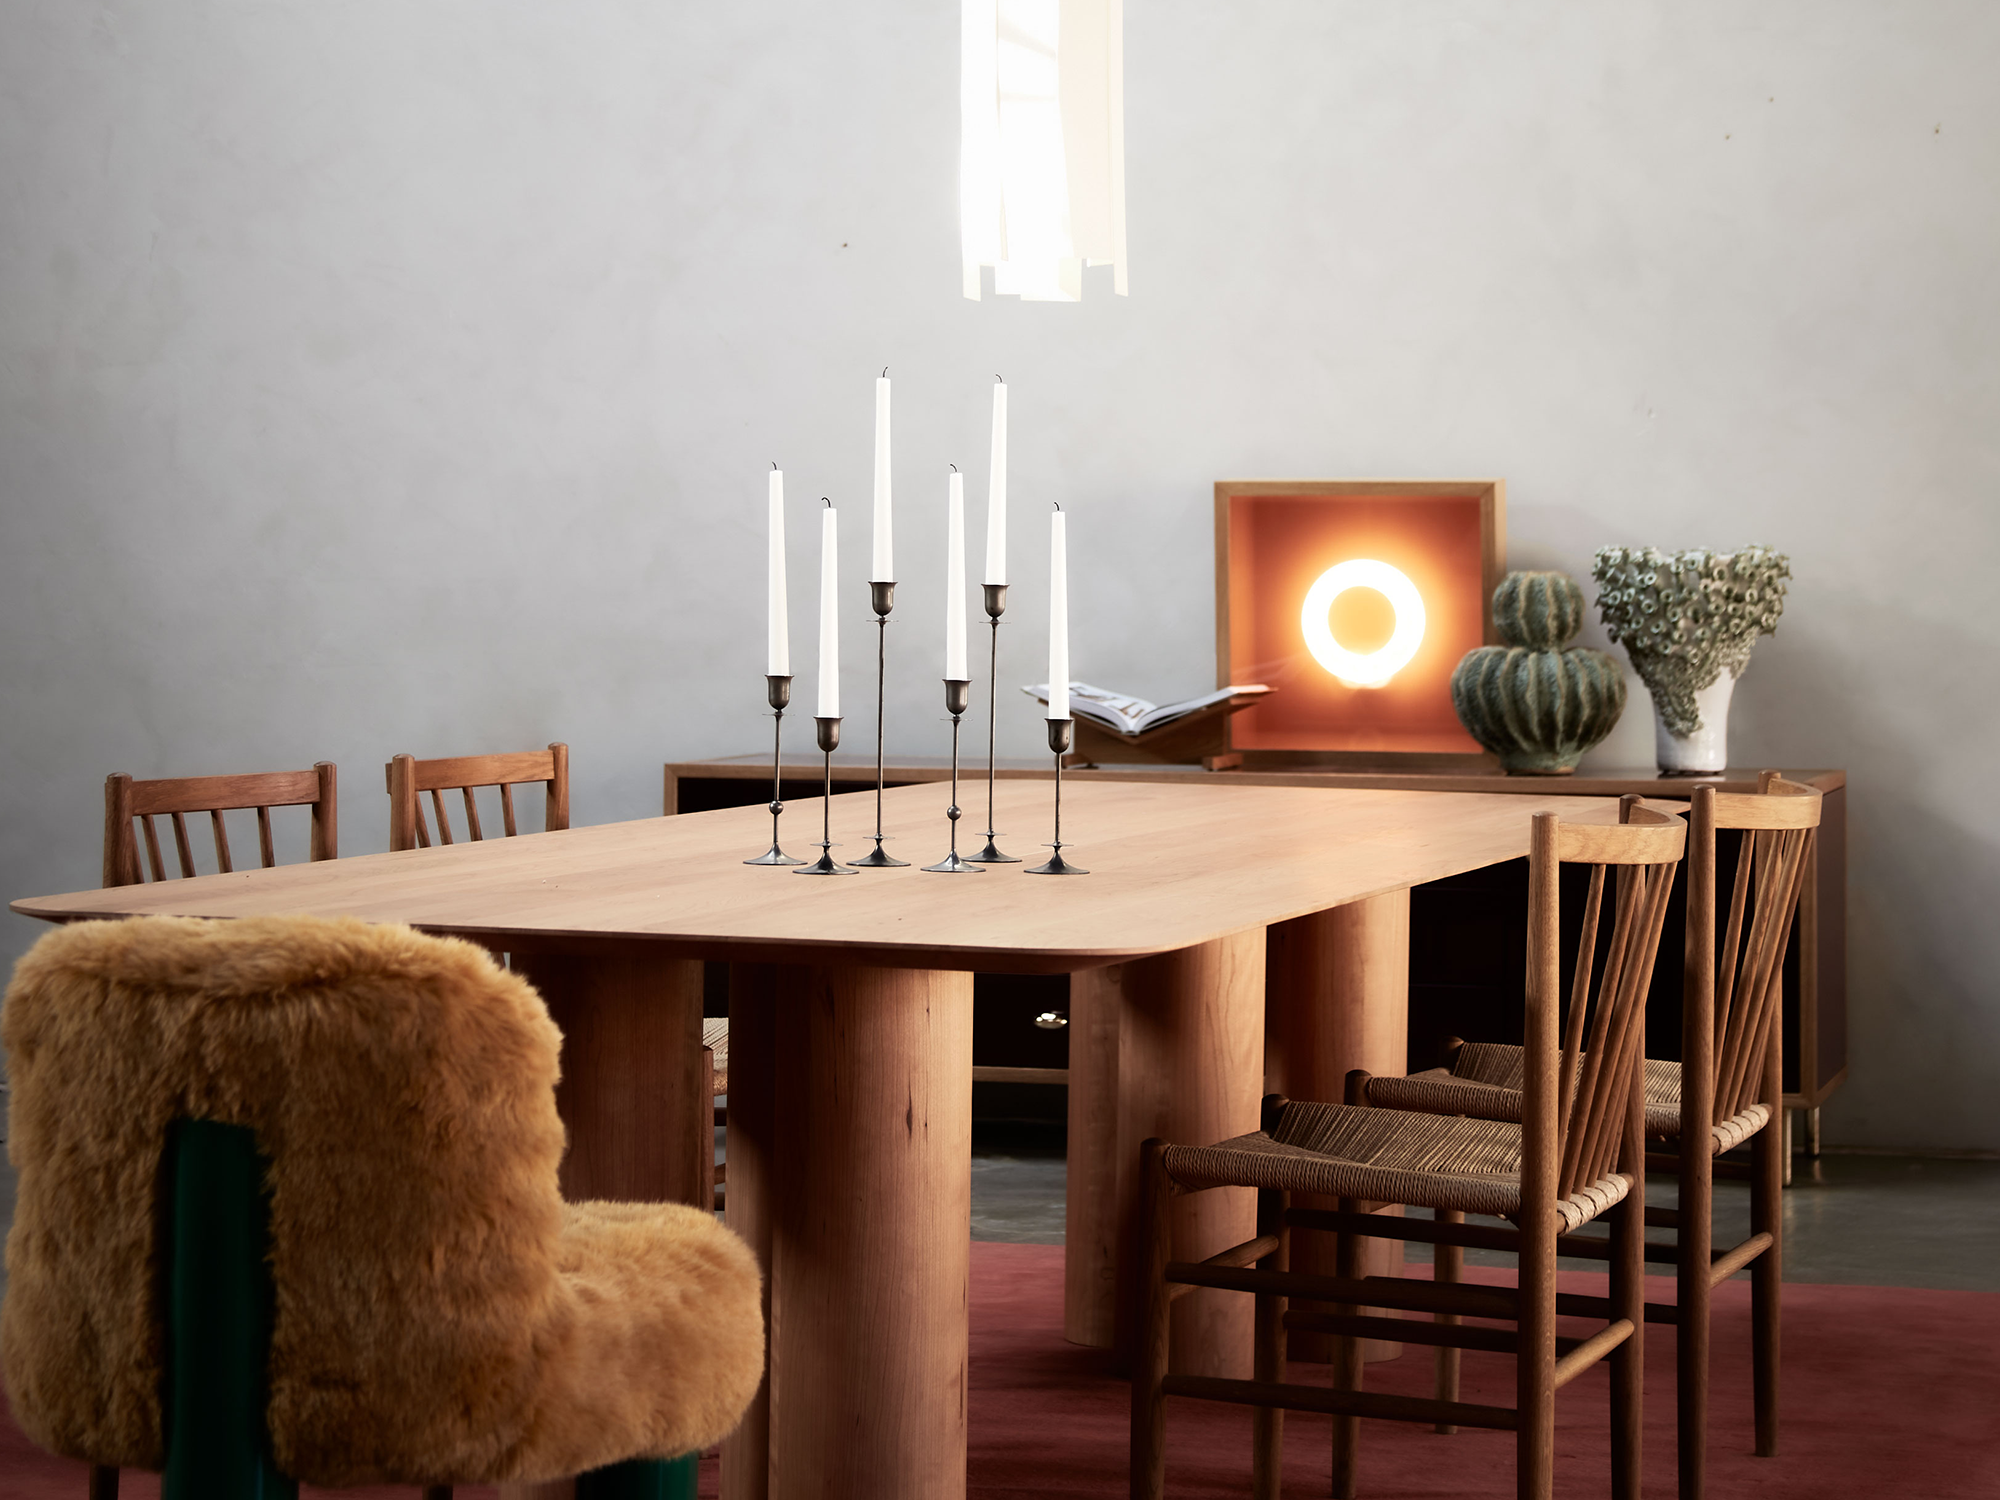 A wooden table with a candle holder on it, four wood chairs and a furry orange chair surrounding it. There is also a furniture piece in the background with a book, different vases and a circle lamp inside a wooden frame.